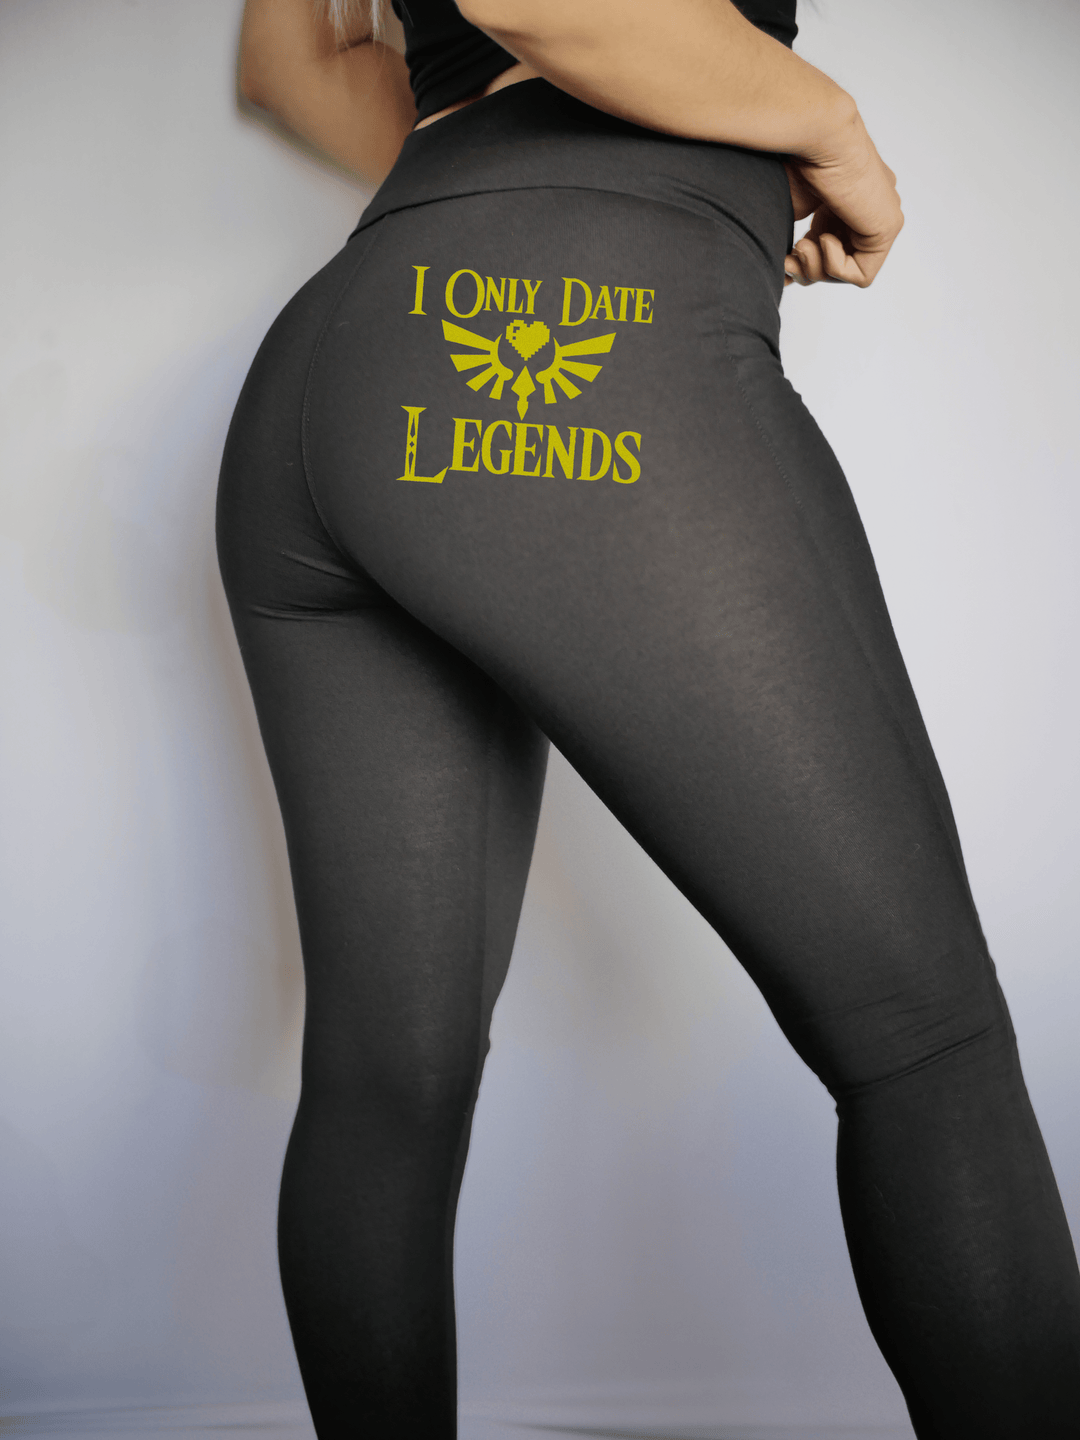 PixelThat Punderwear Yoga Pants Small I Only Date Legends Yoga Pants